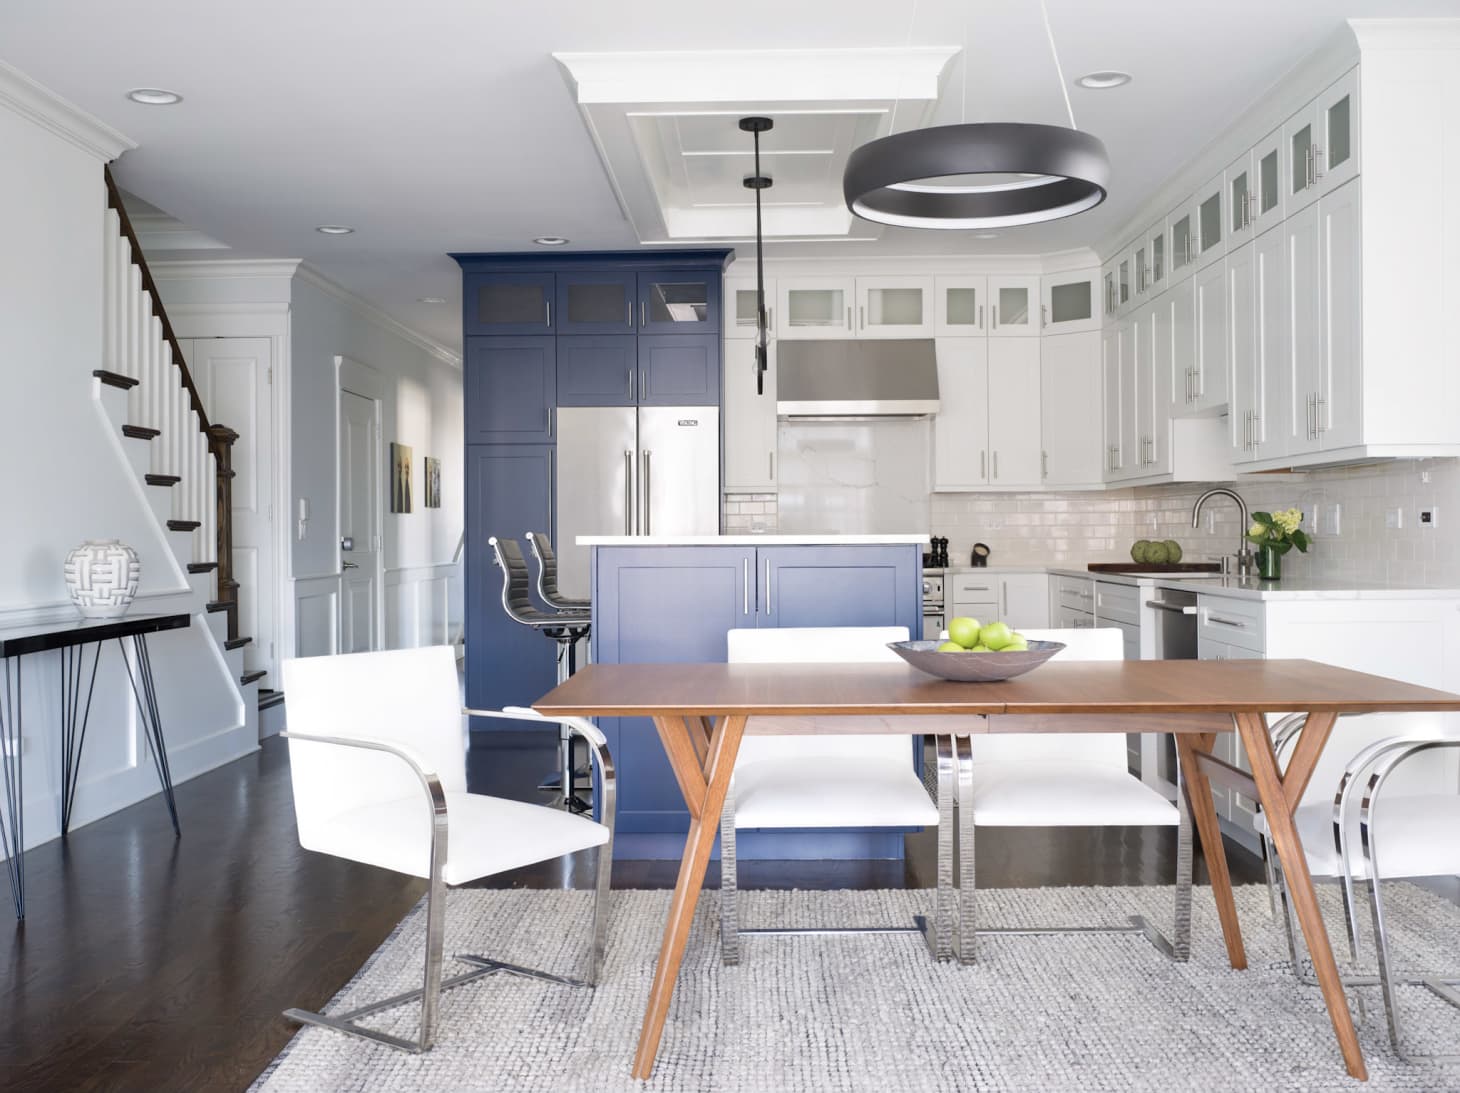 The Best Kitchen Cabinet Trends for 2020, According to ...